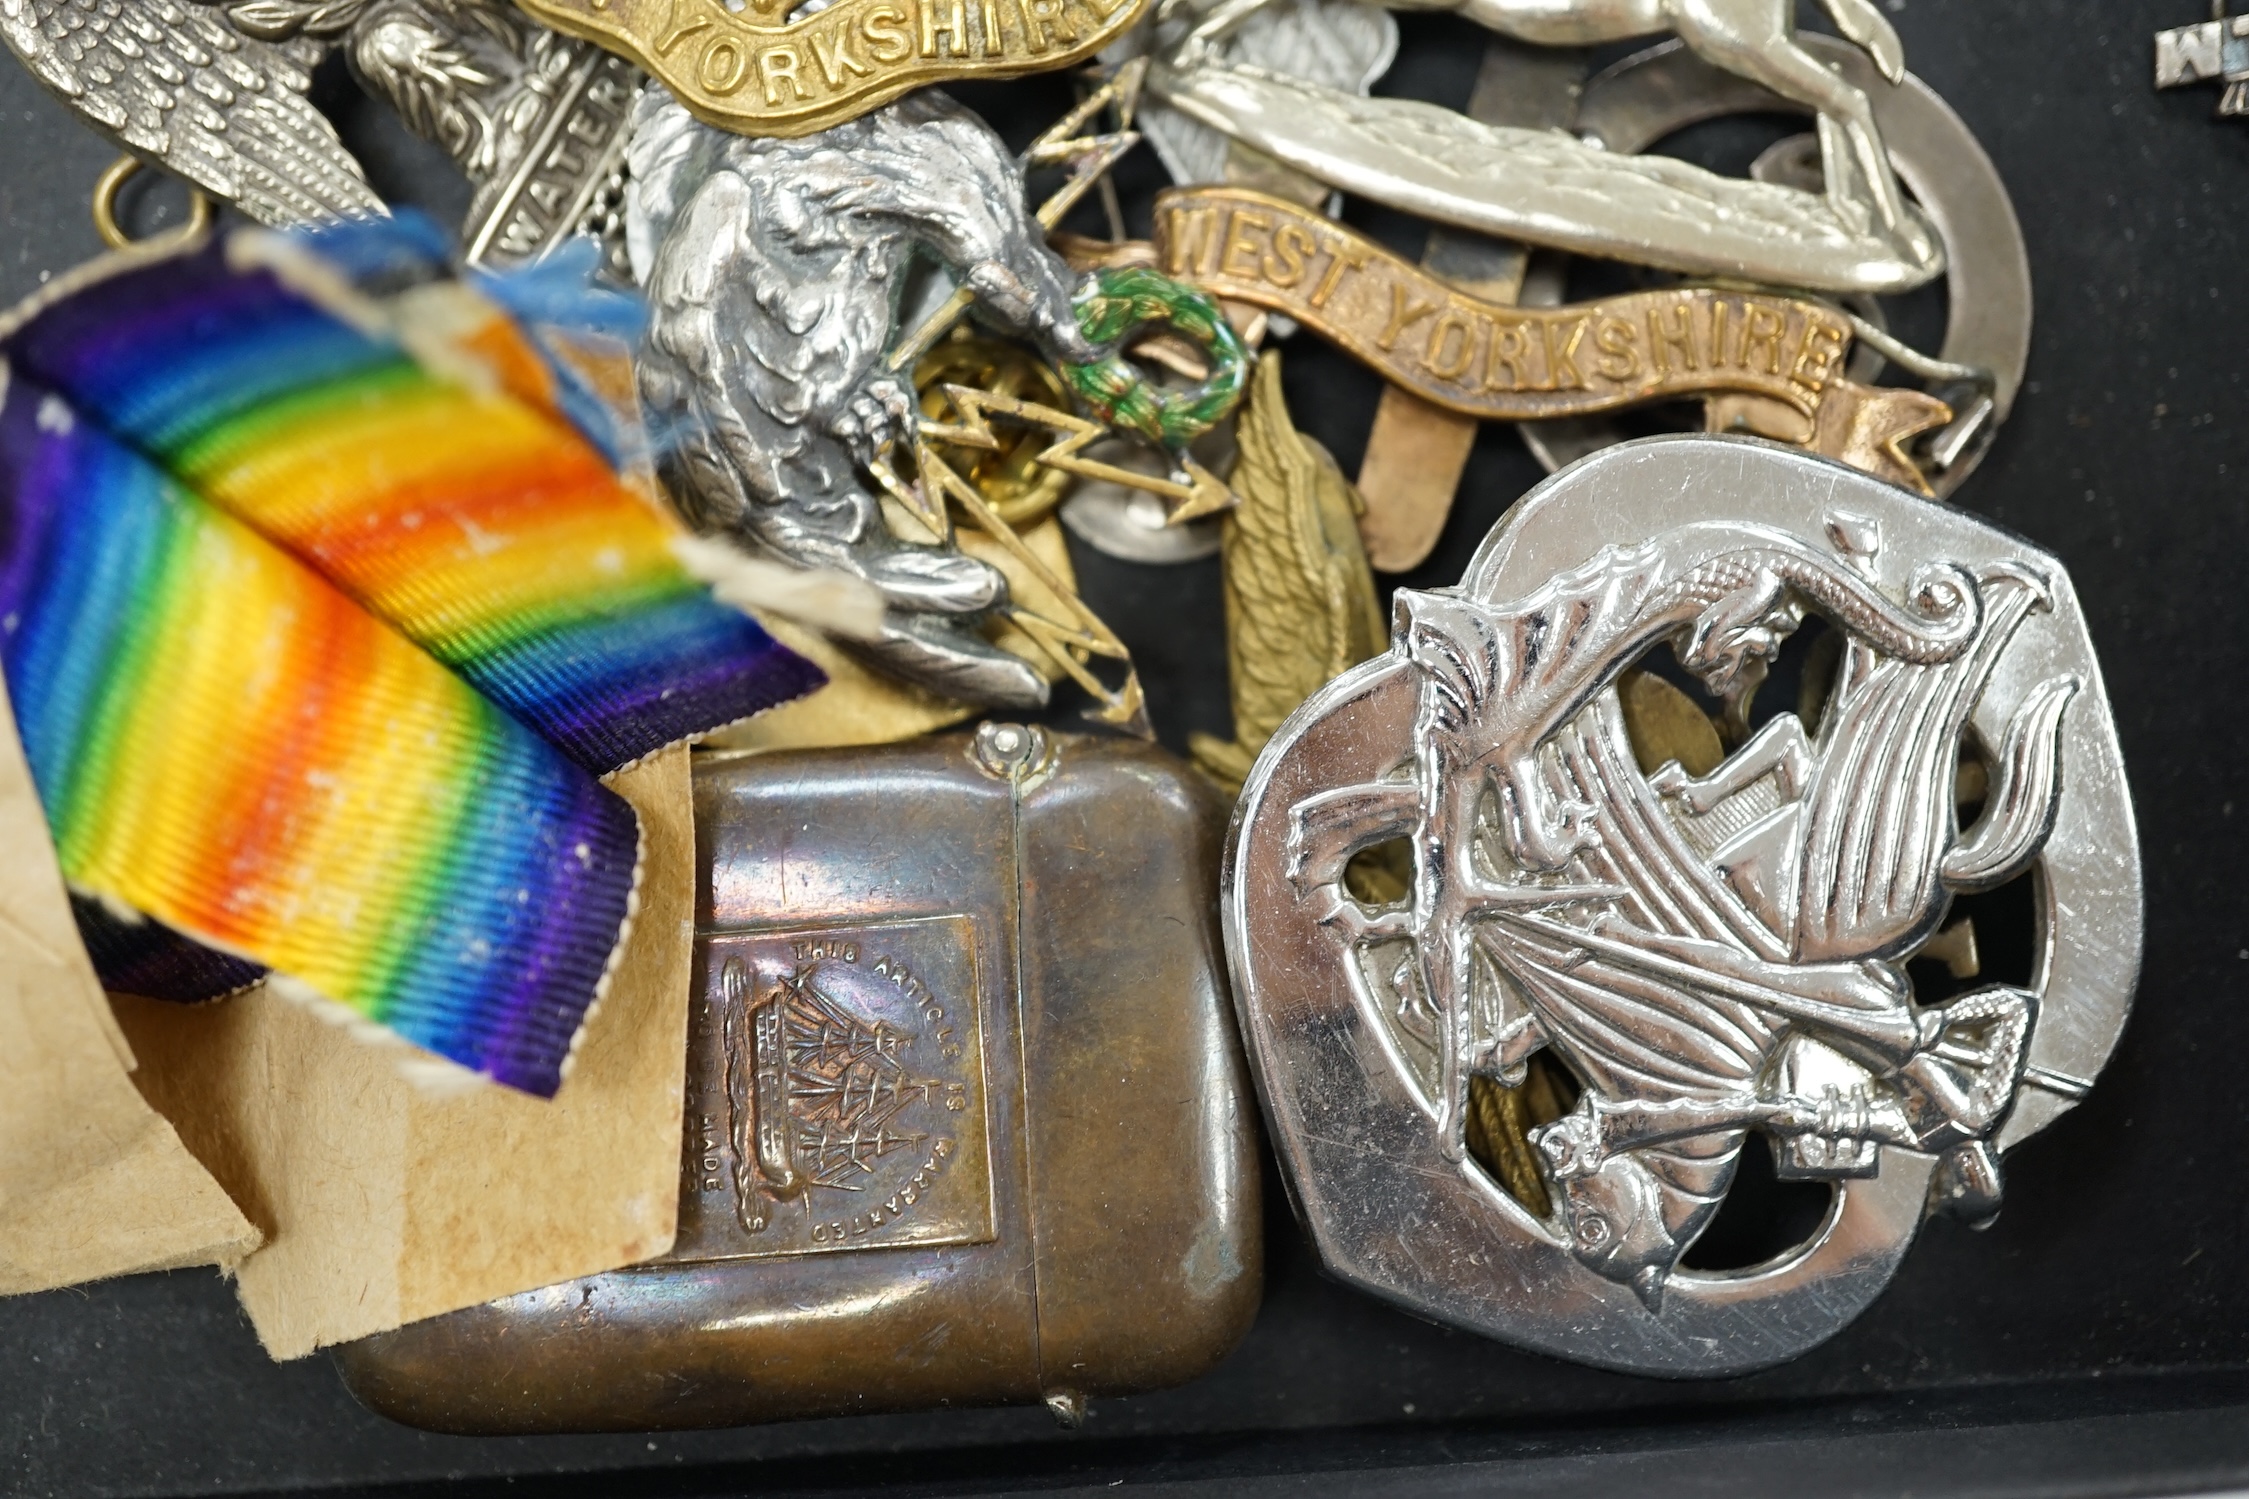 A collection of military cap badges and medals, including a First World War medal pair awarded to A.M. F.W. Wright, together with seventeen British and German cap badges including; the West Yorkshire Regiment, the Royal